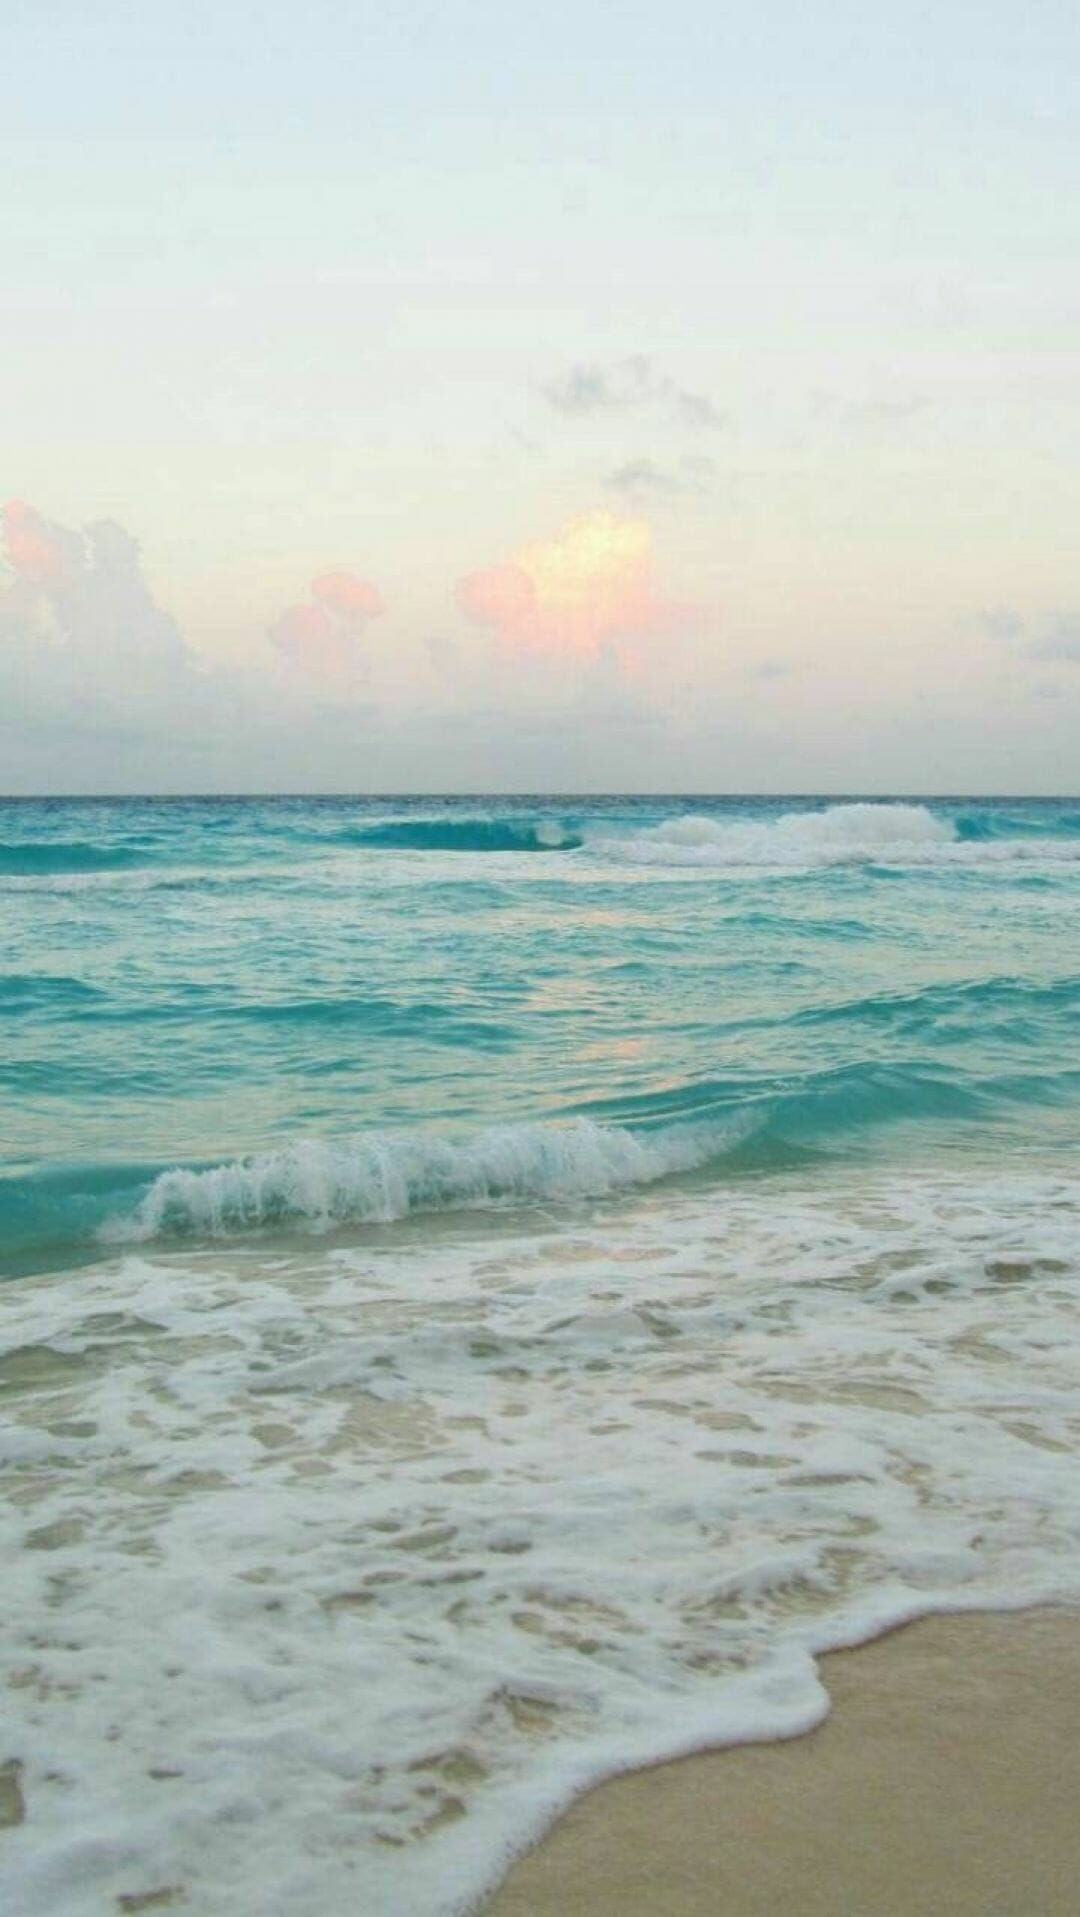 IPhone wallpaper of a beautiful beach with waves - Beach